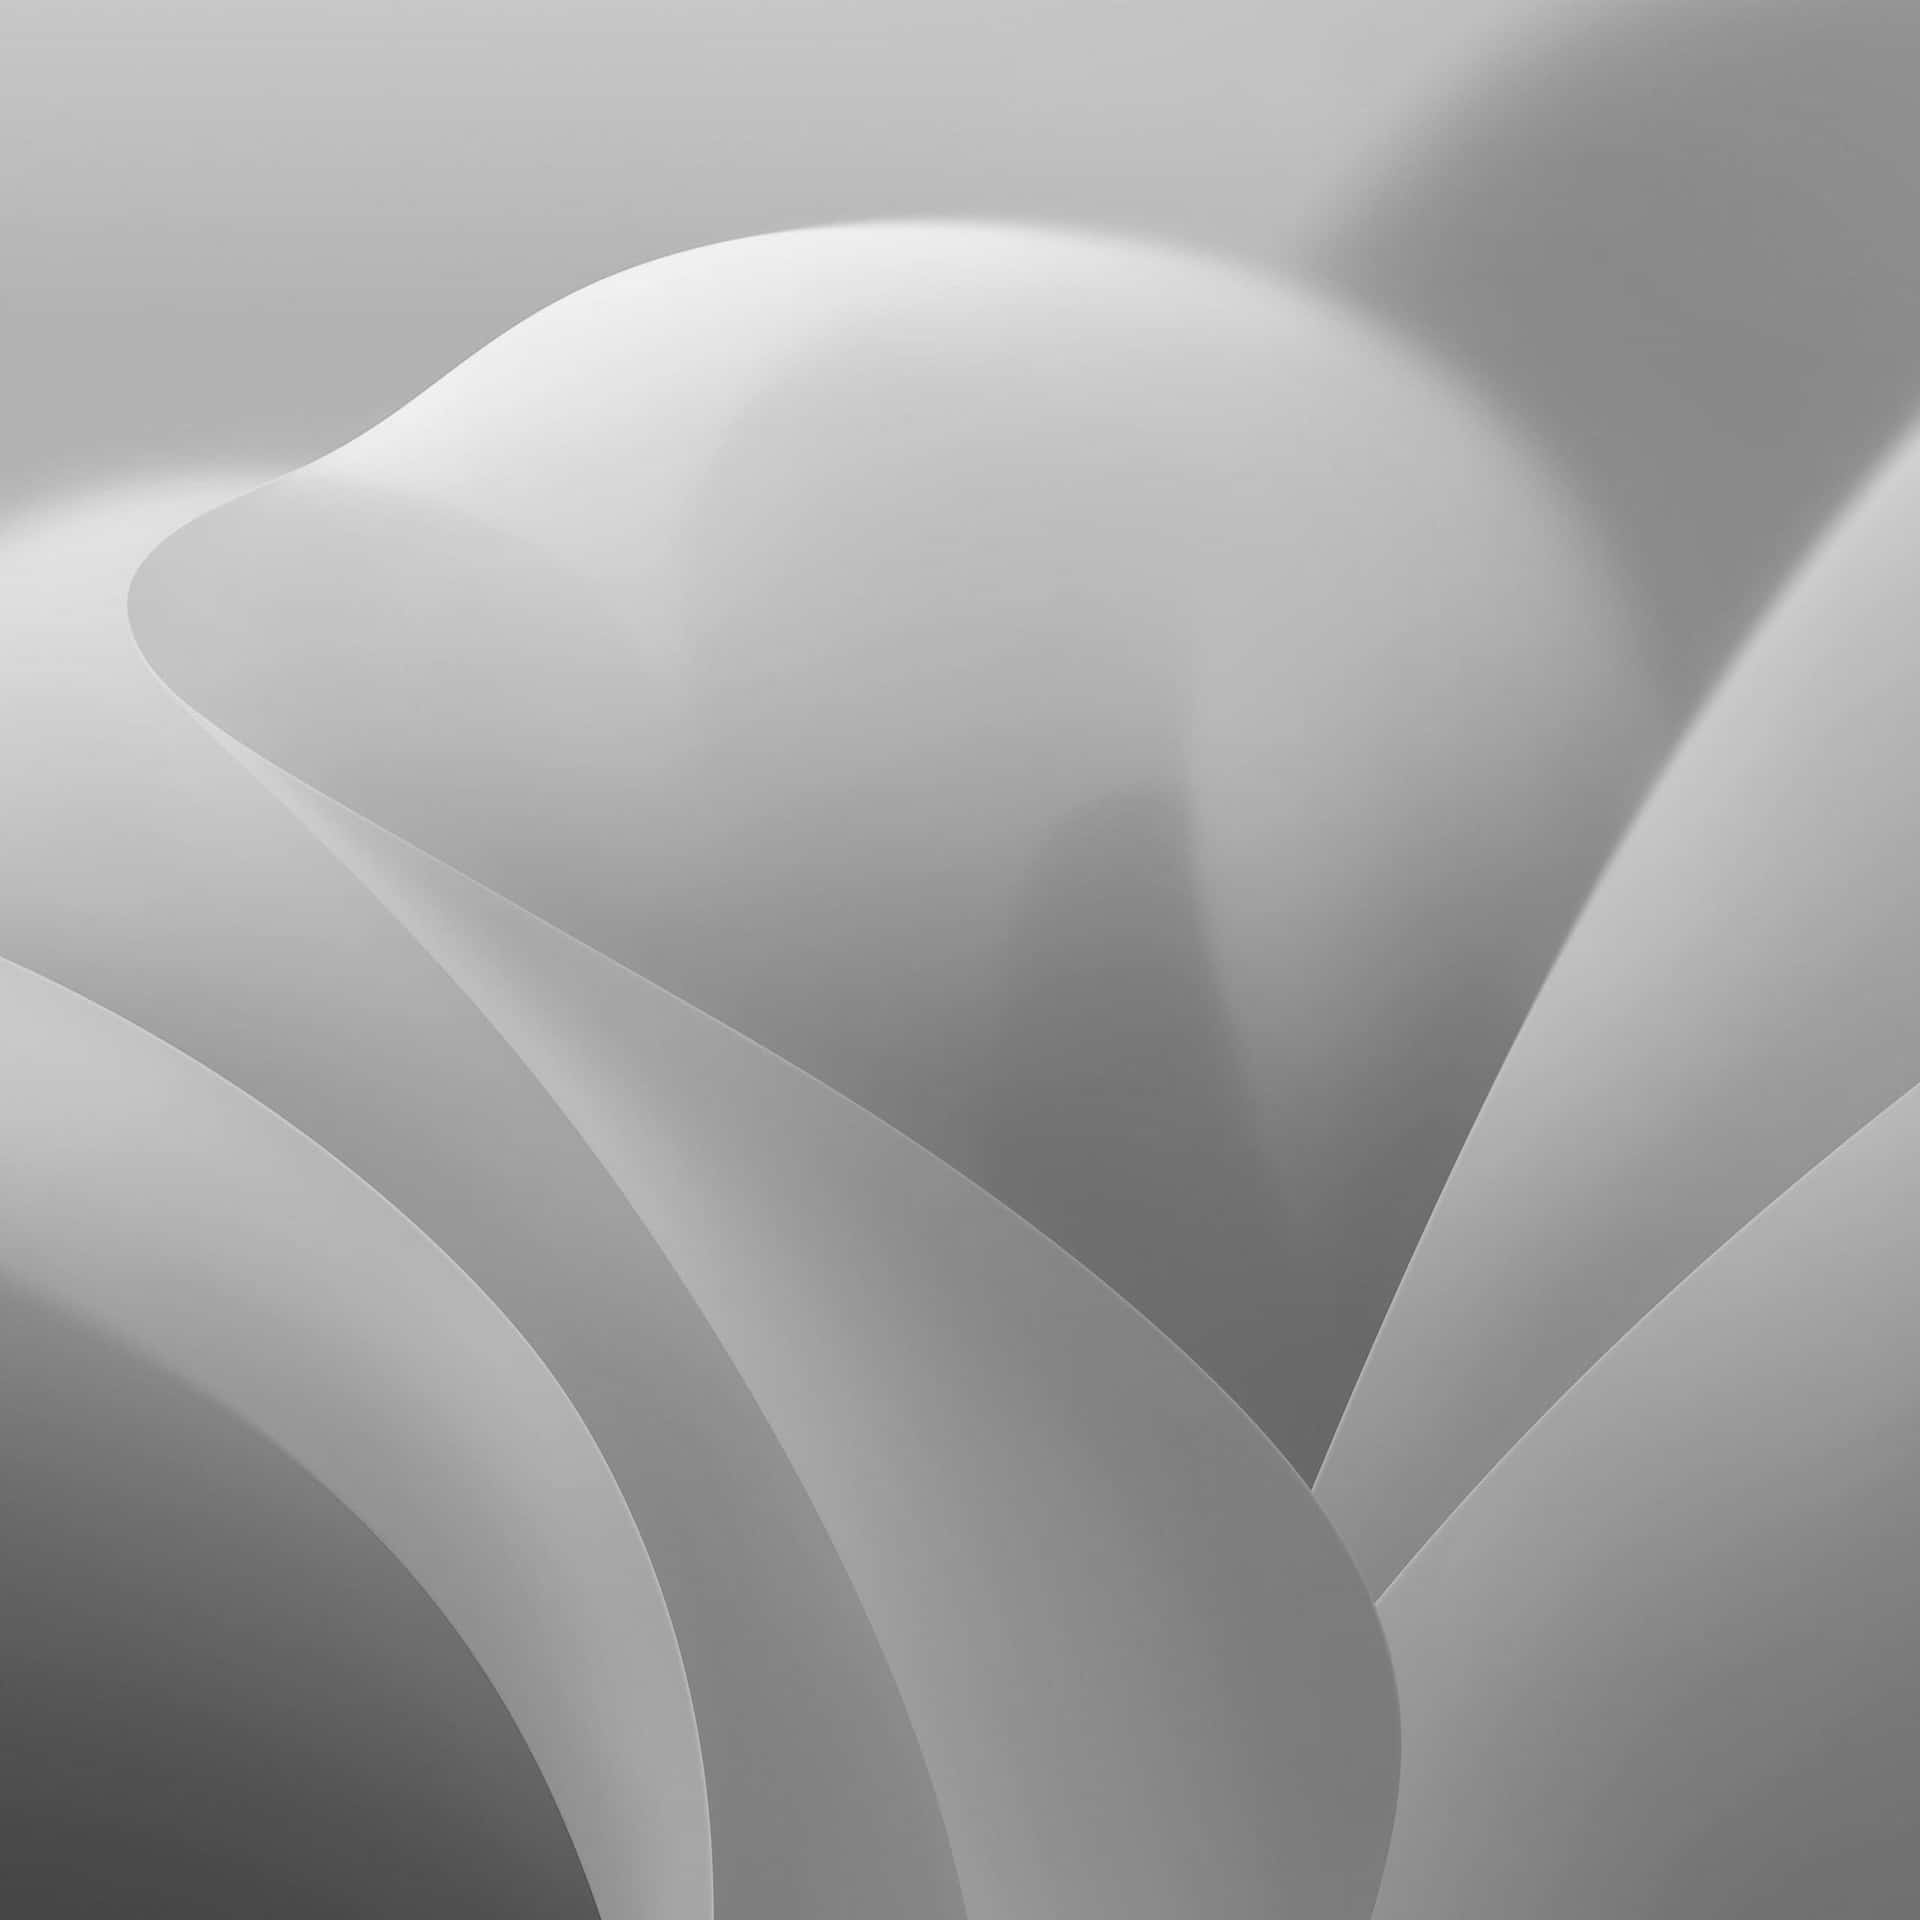 Abstract Silver Waves Background Wallpaper